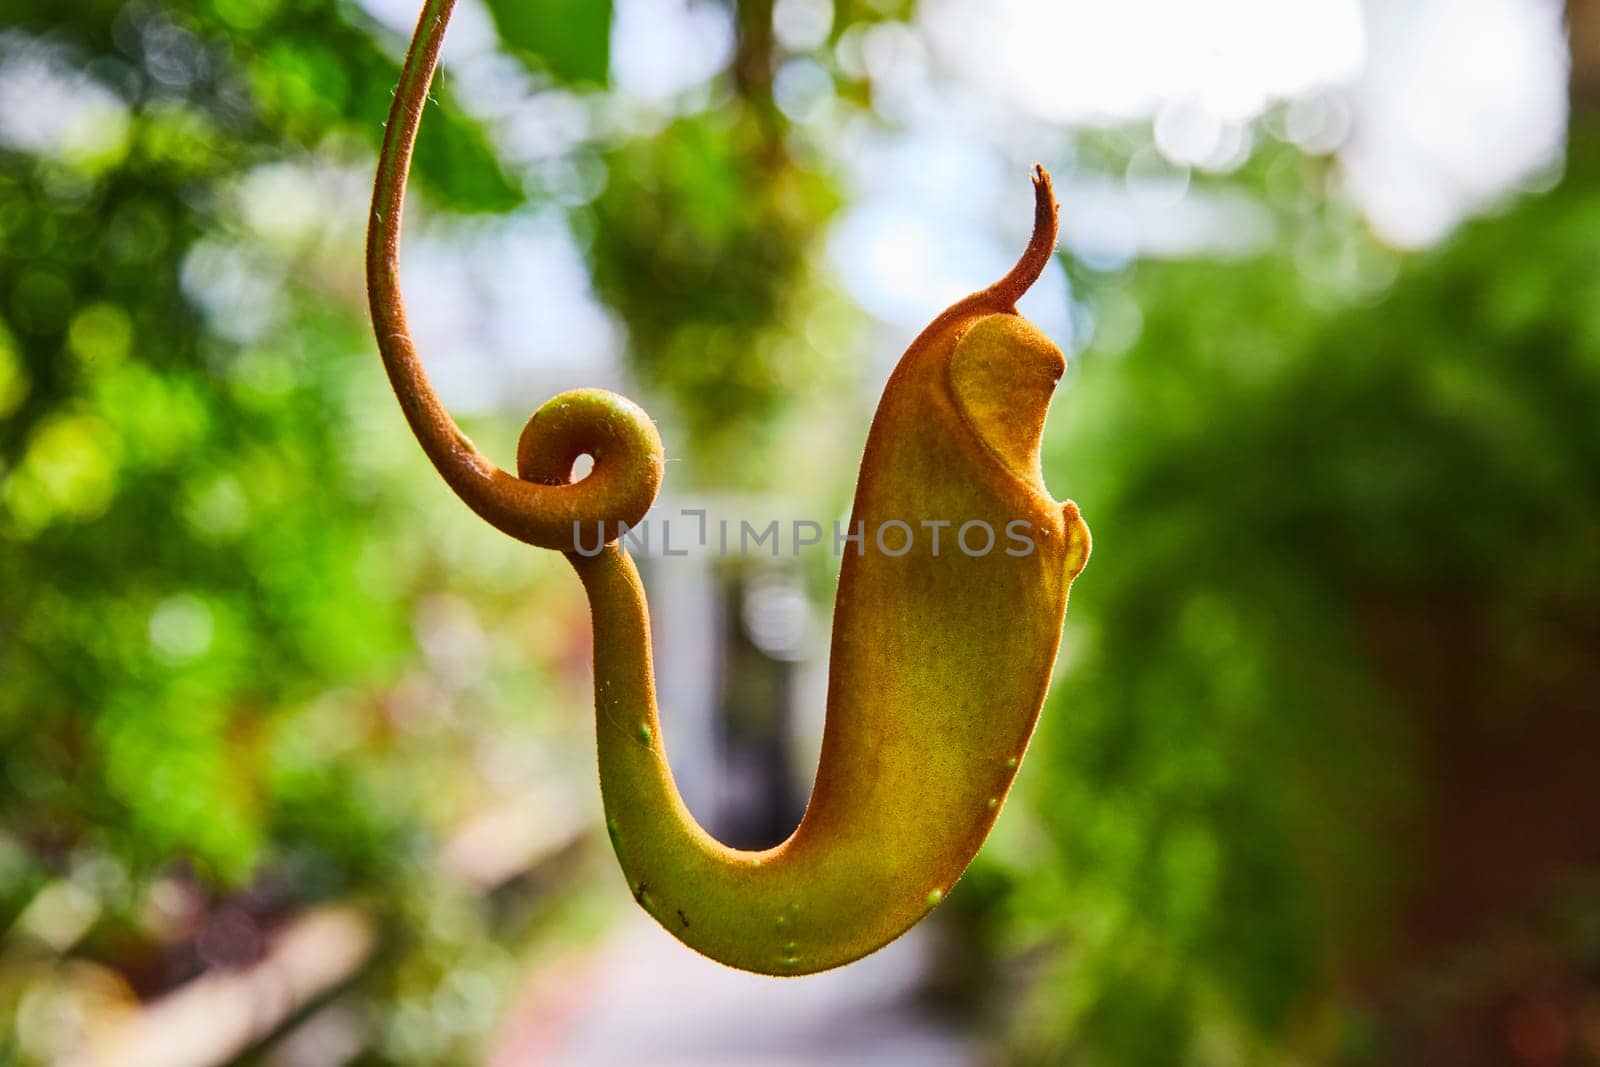 Climbing Pitcher Plant Tendril with Bud in Soft Light by njproductions